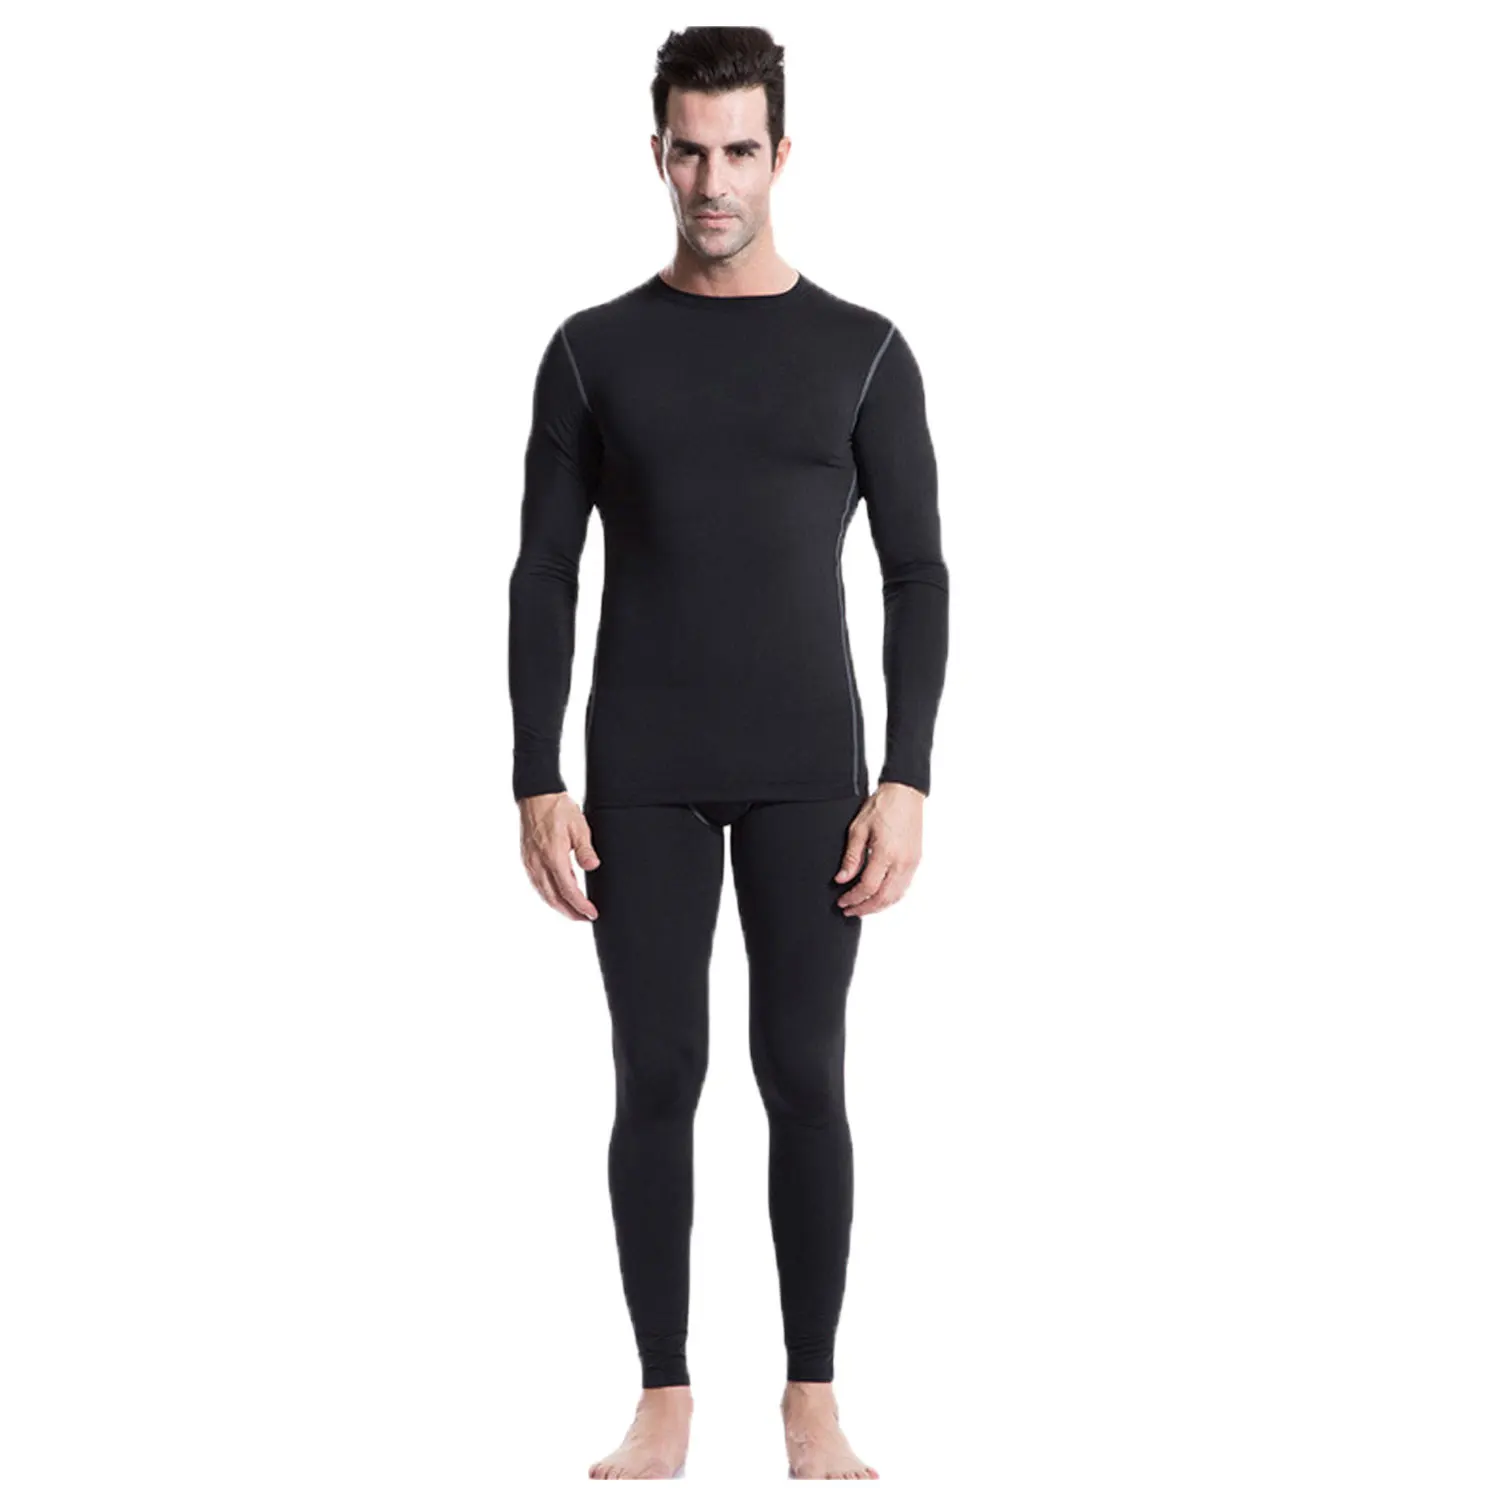 Long Johns for Men Thermal Underwear Set Long Sleeve Base Layer Compression Suit Winter Thermals Top & Bottom for Workout Skiing Running Thermal Underwear Mens 